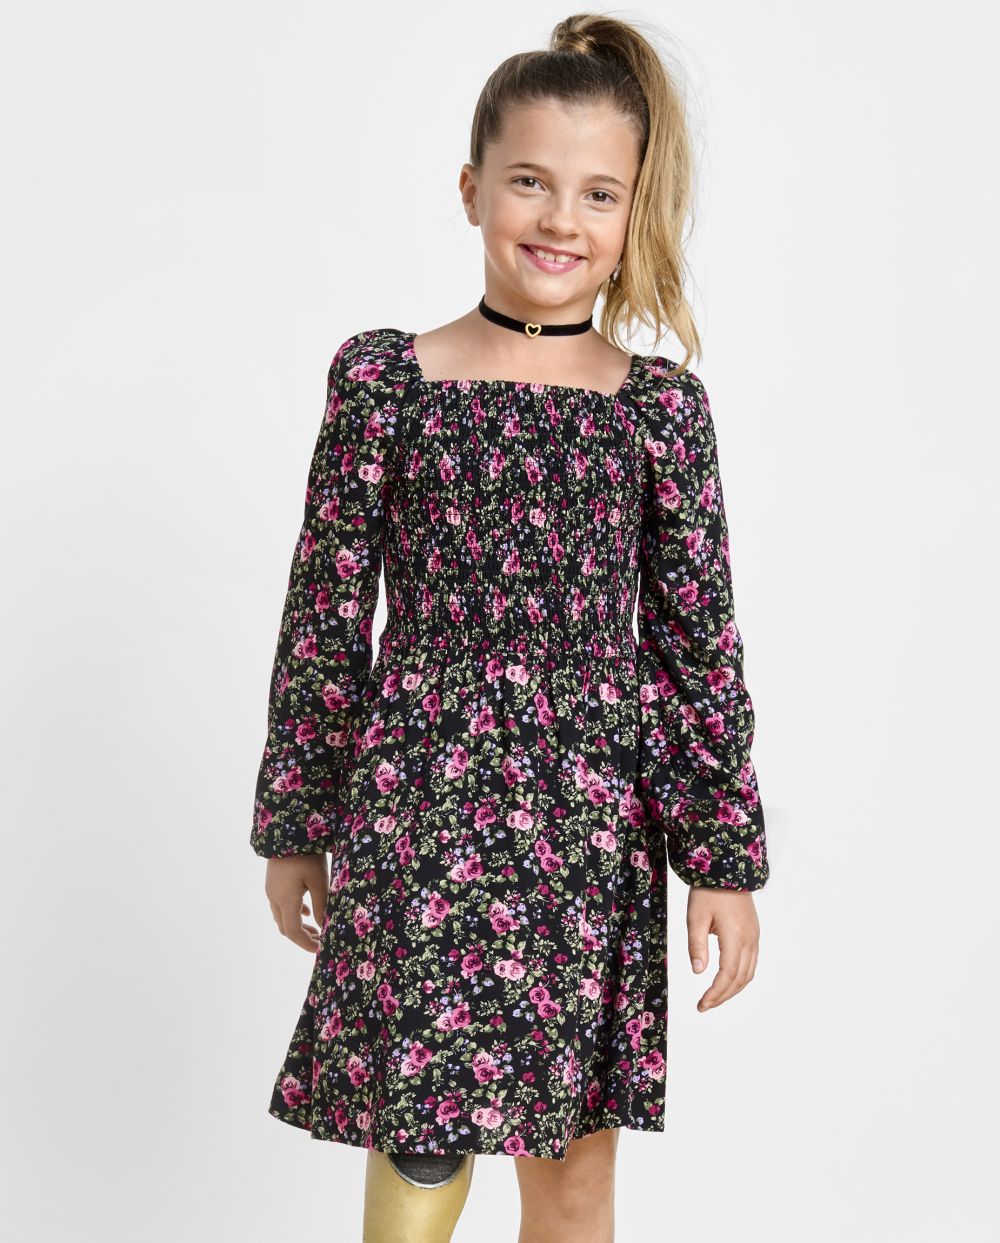 Girls Above the Knee Floral Print Long Sleeves Rayon Smocked Square Neck Dress